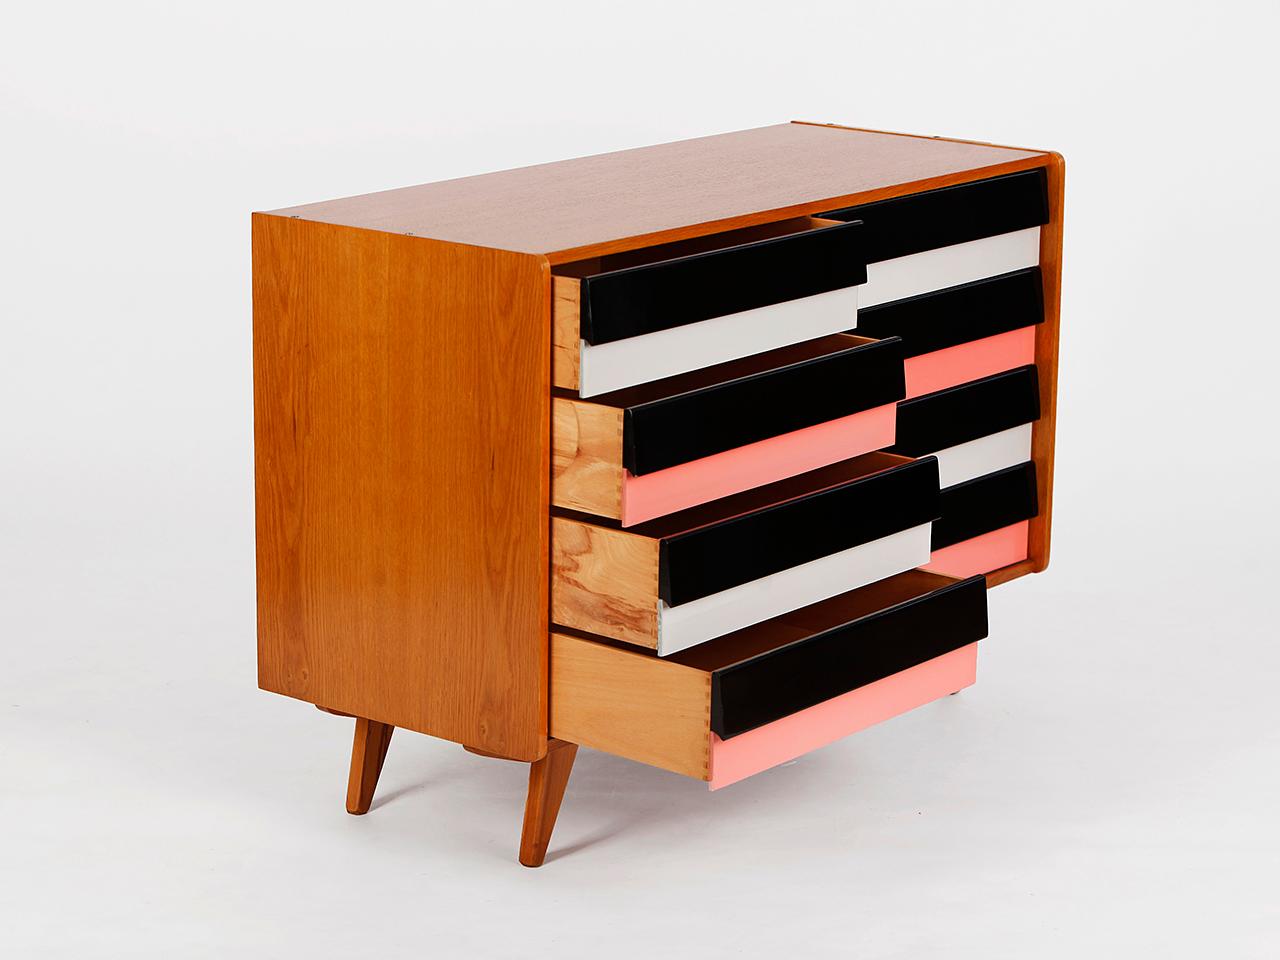 20th Century Sideboard U 453 by Jiri Jiroutek for Interior Praha with Wooden Drawers, 1960s For Sale